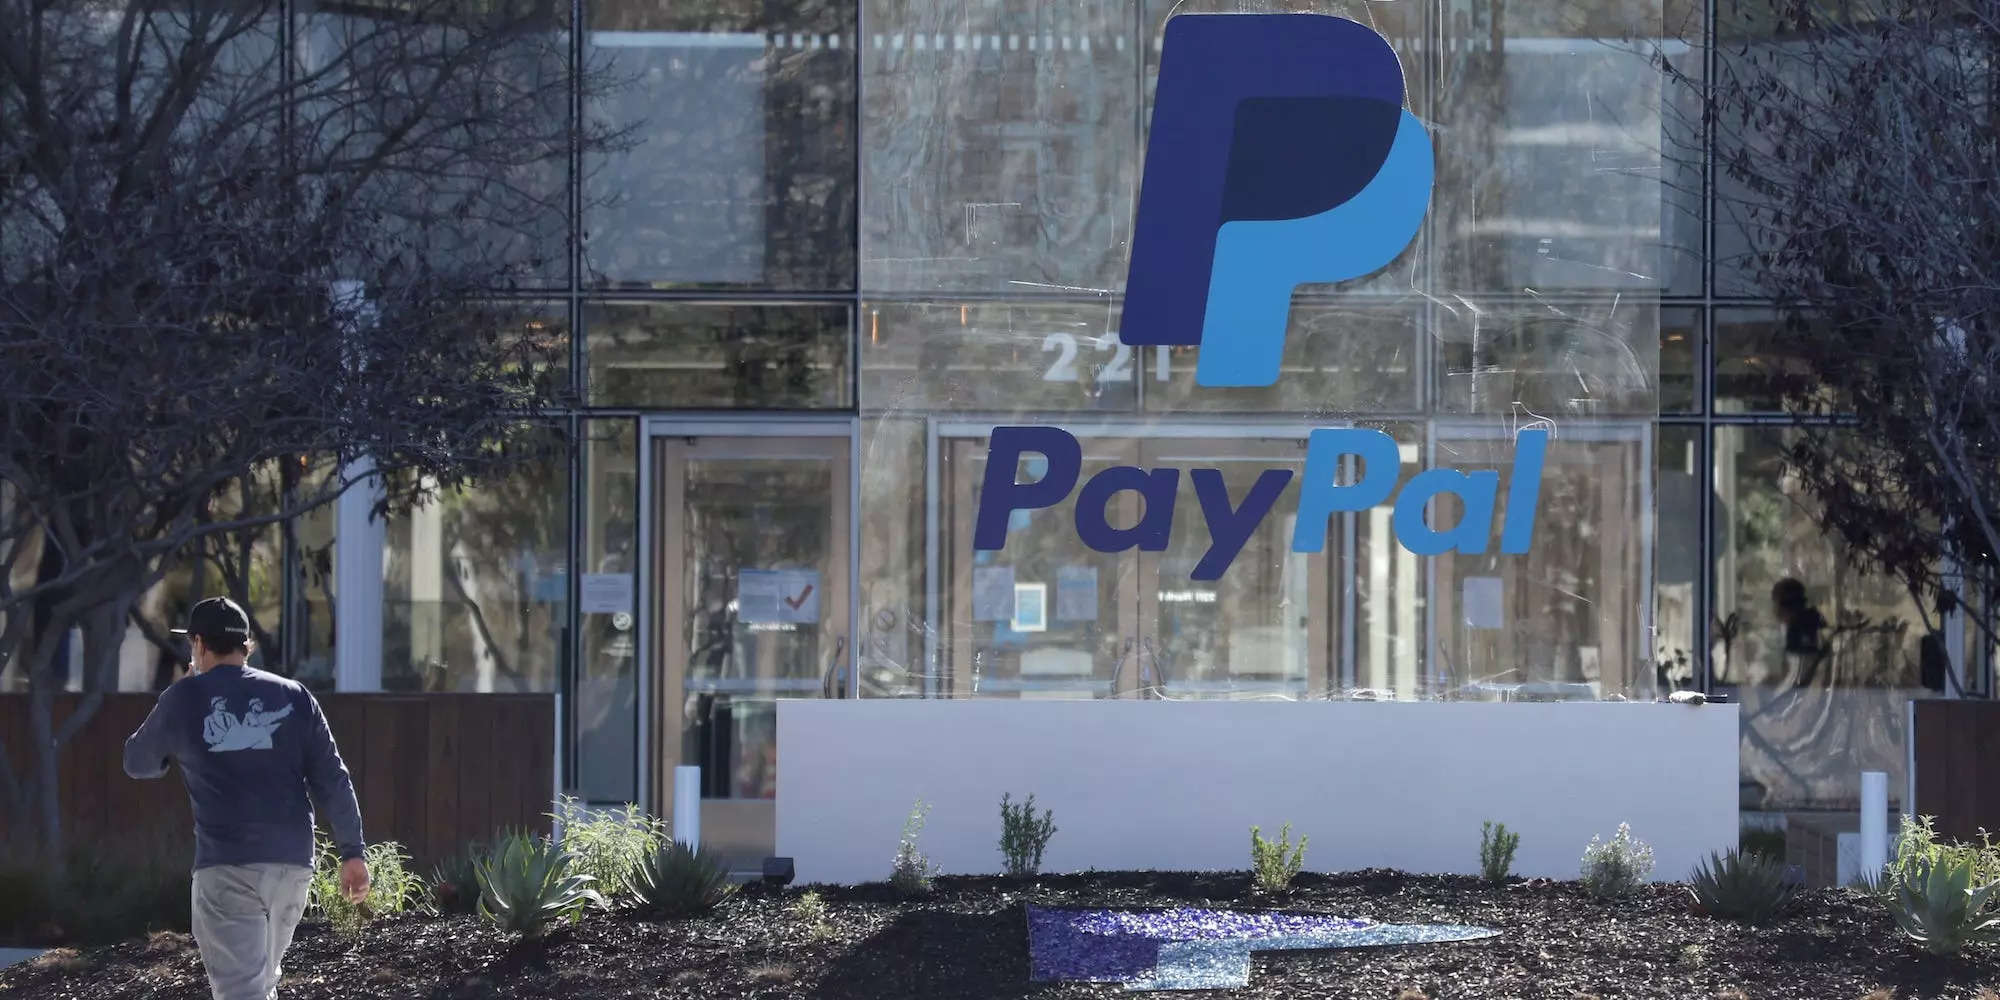 PayPal jumps 14 after the fintech launches a massive 15 billion stock